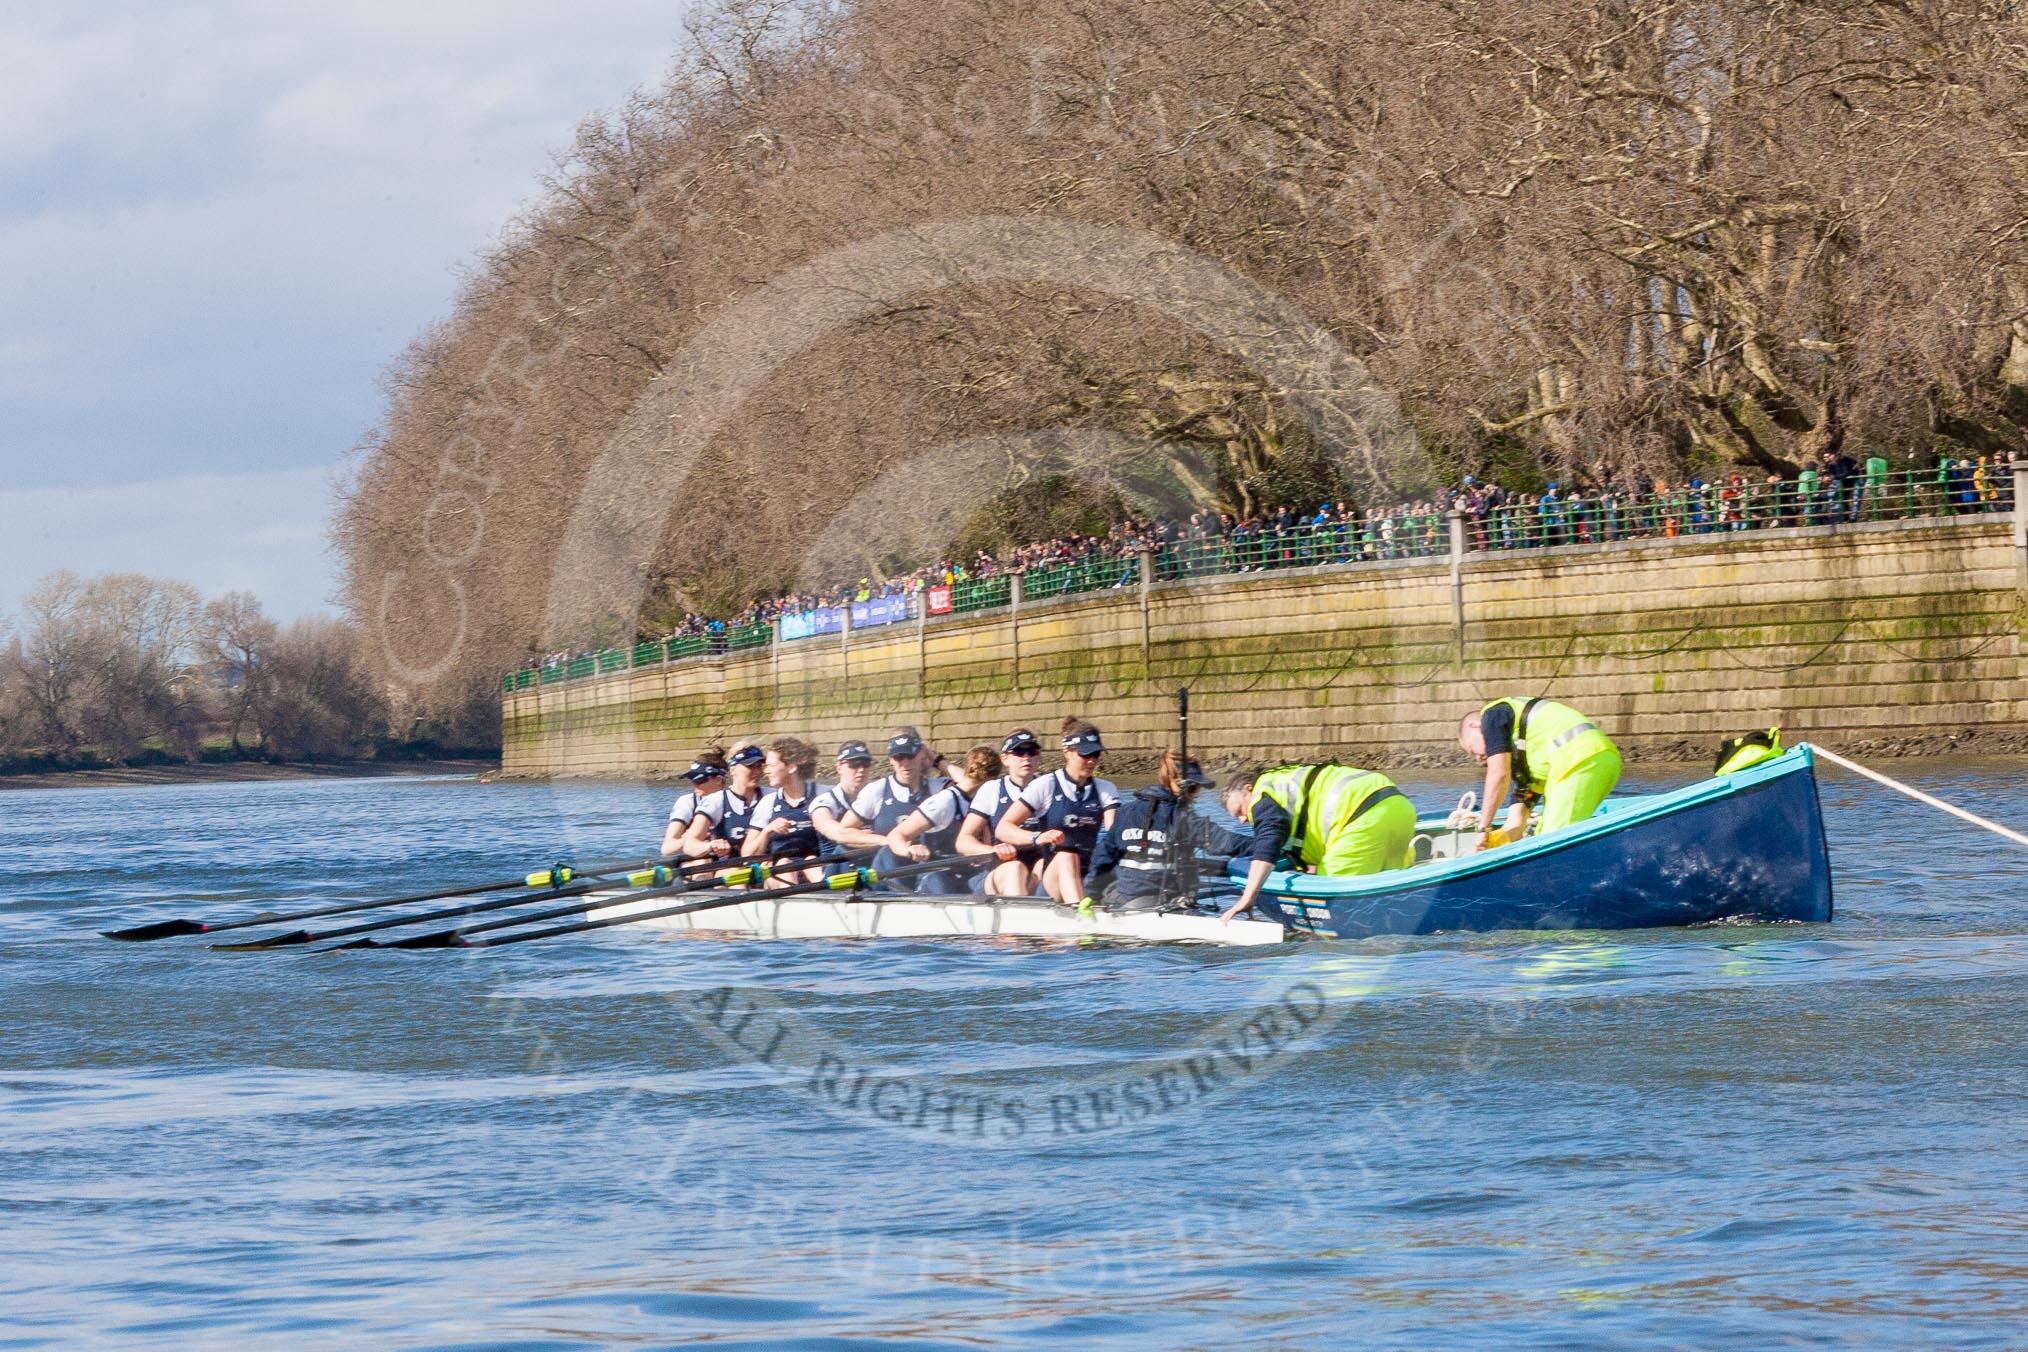 The Boat Race season 2016 -  The Cancer Research Women's Boat Race.
River Thames between Putney Bridge and Mortlake,
London SW15,

United Kingdom,
on 27 March 2016 at 14:05, image #149